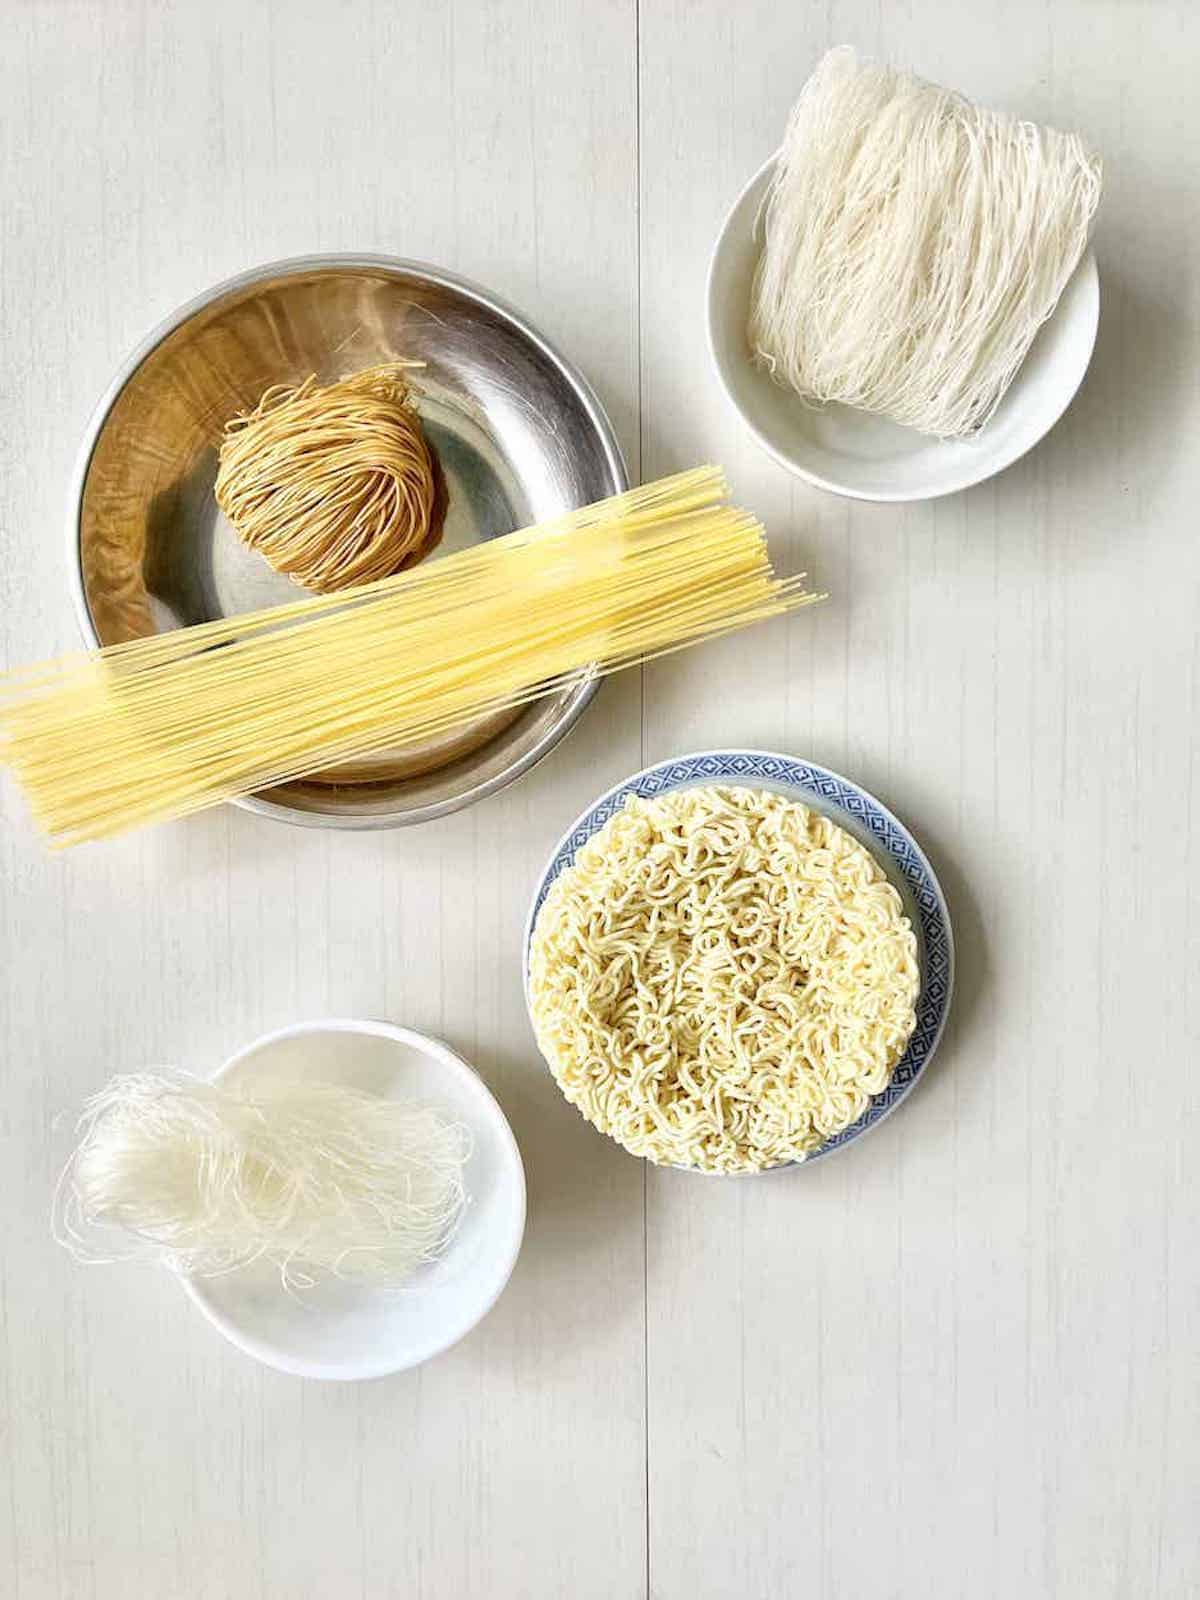 Various types of thin noodles, including egg noodles, glass noodles and rice noodles.